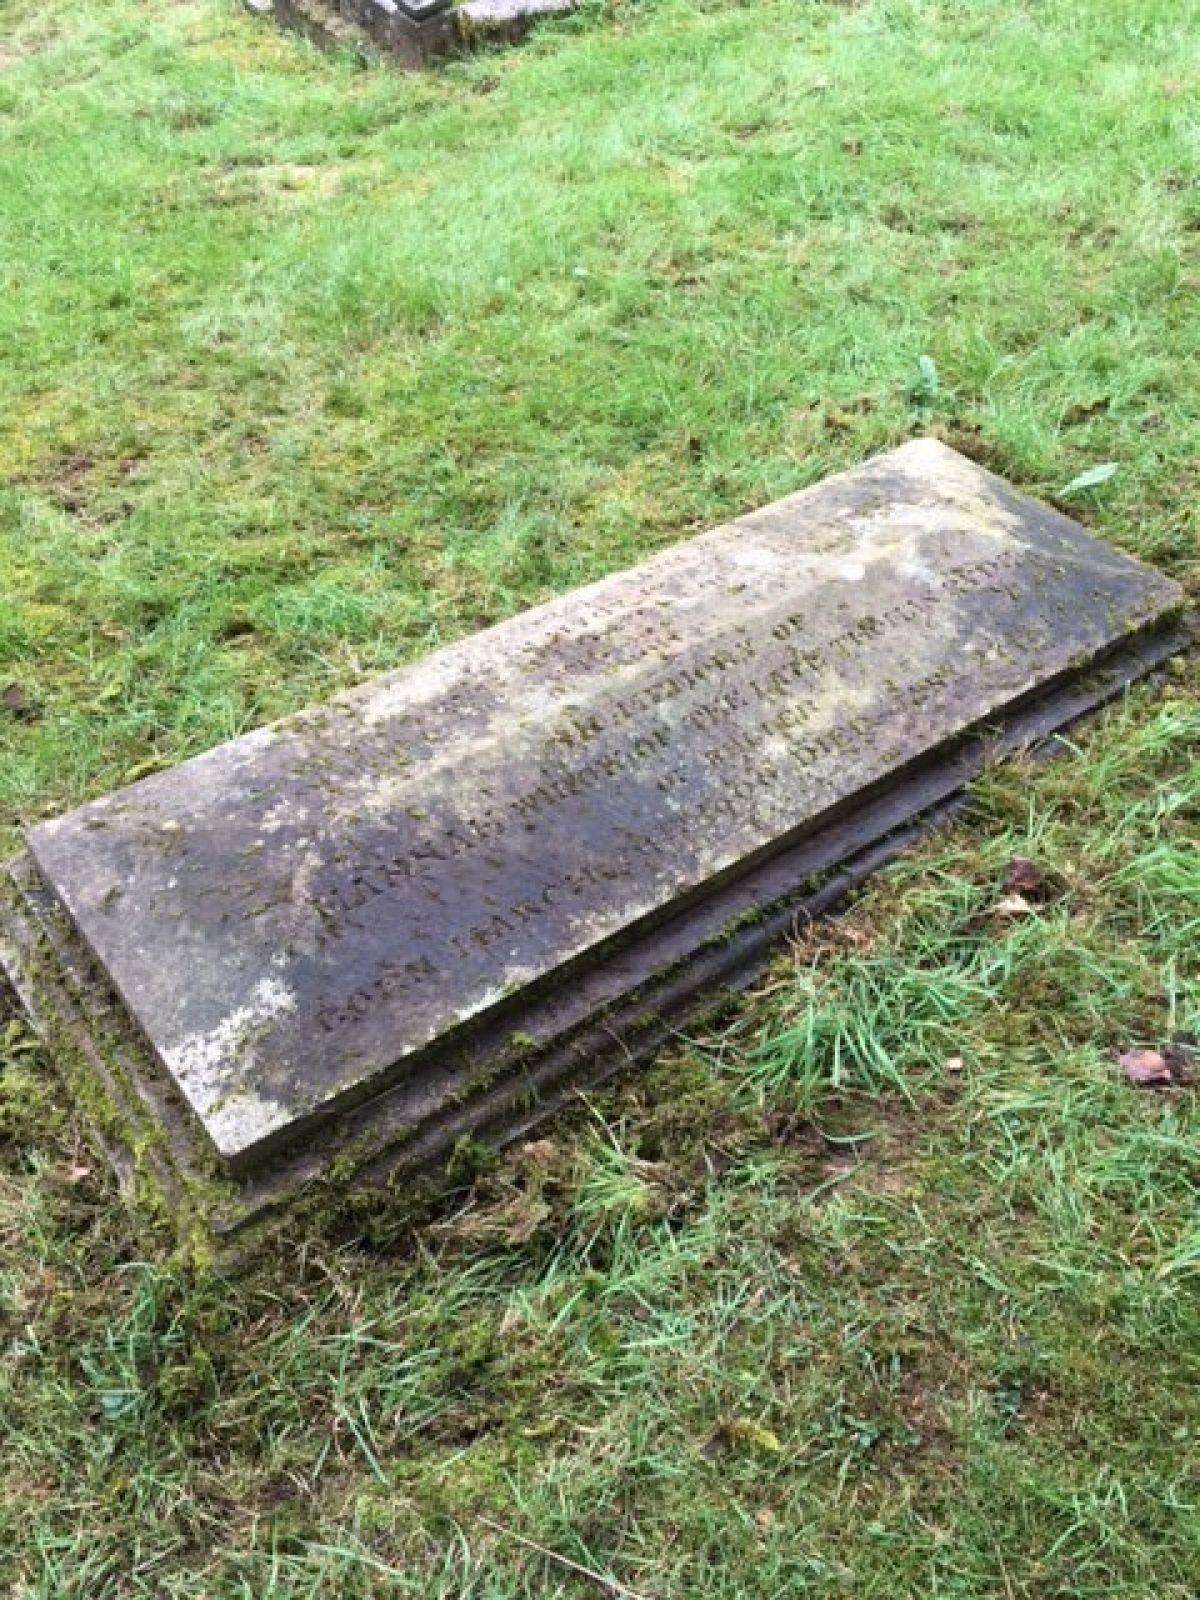 Clear up at Belper Cemetery - 